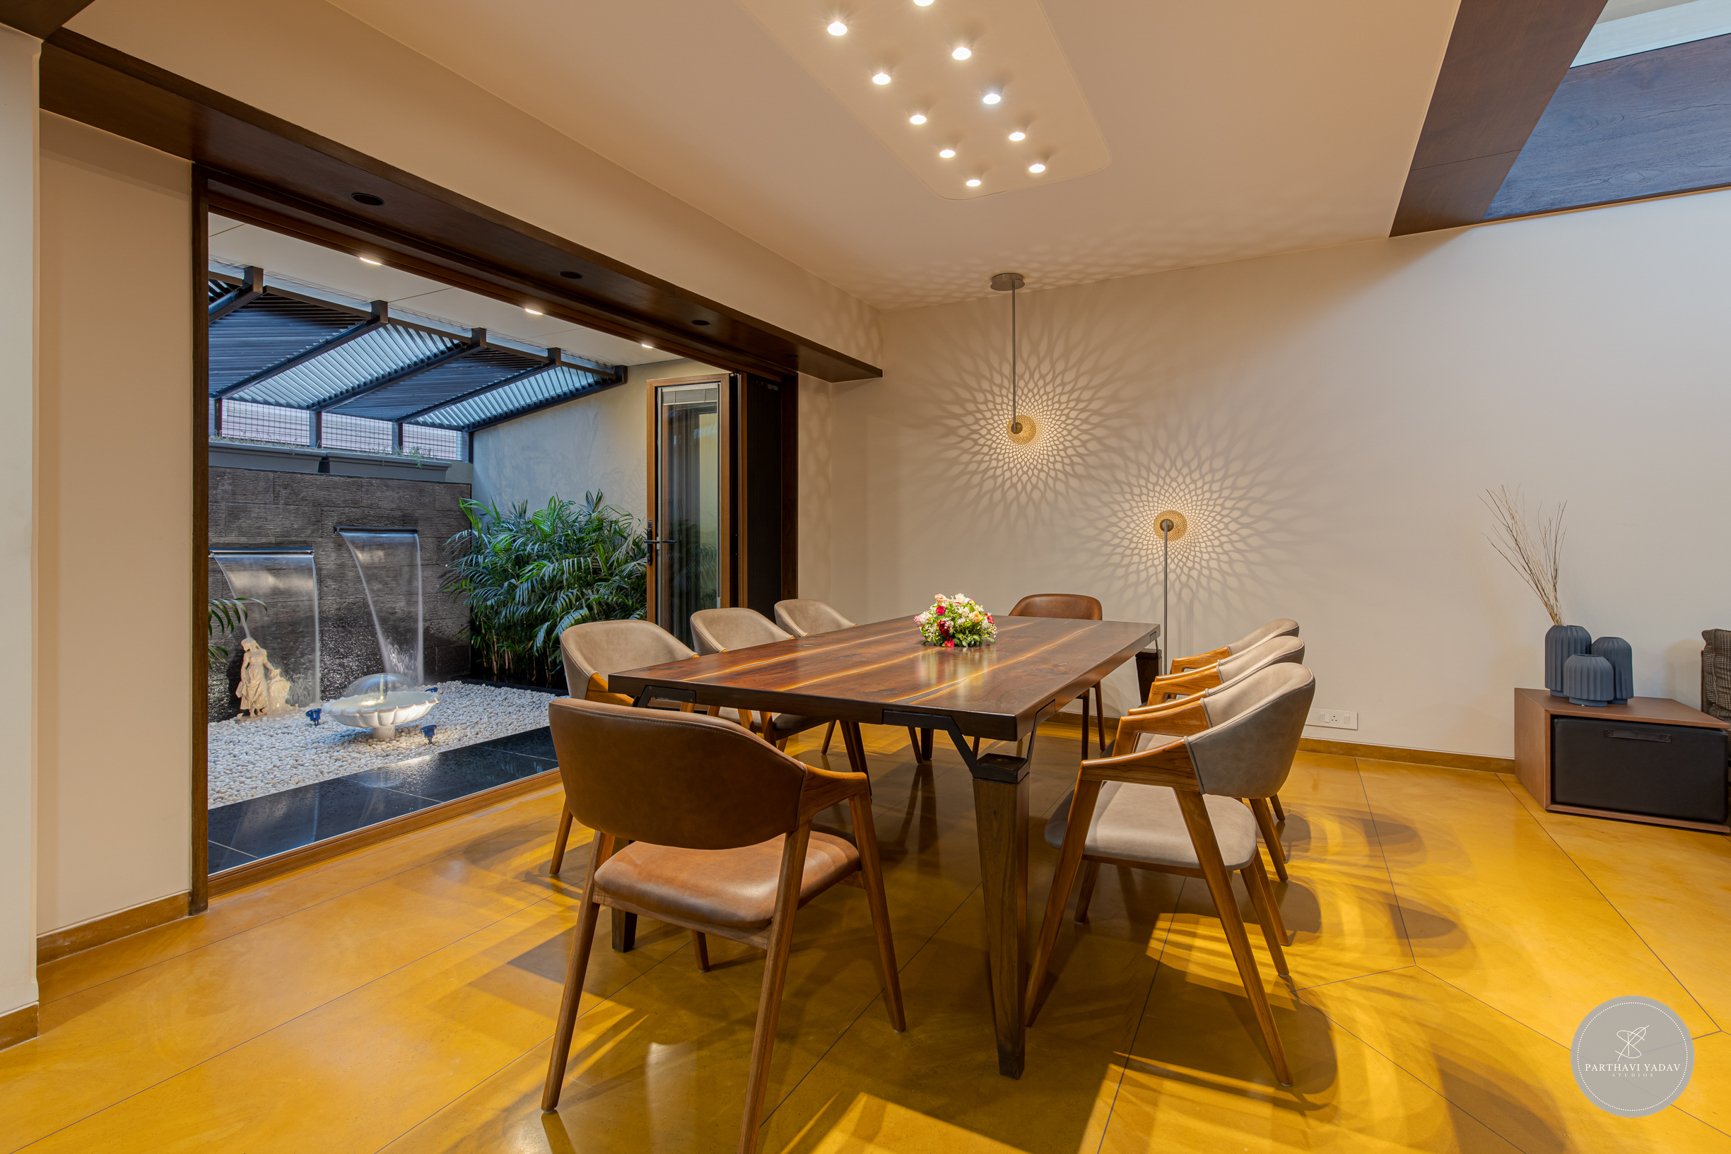 best interior photographer in pune bangalore - award winning lighting in dining space with outdoor fountain and custom wooden dining table and chairs.jpg